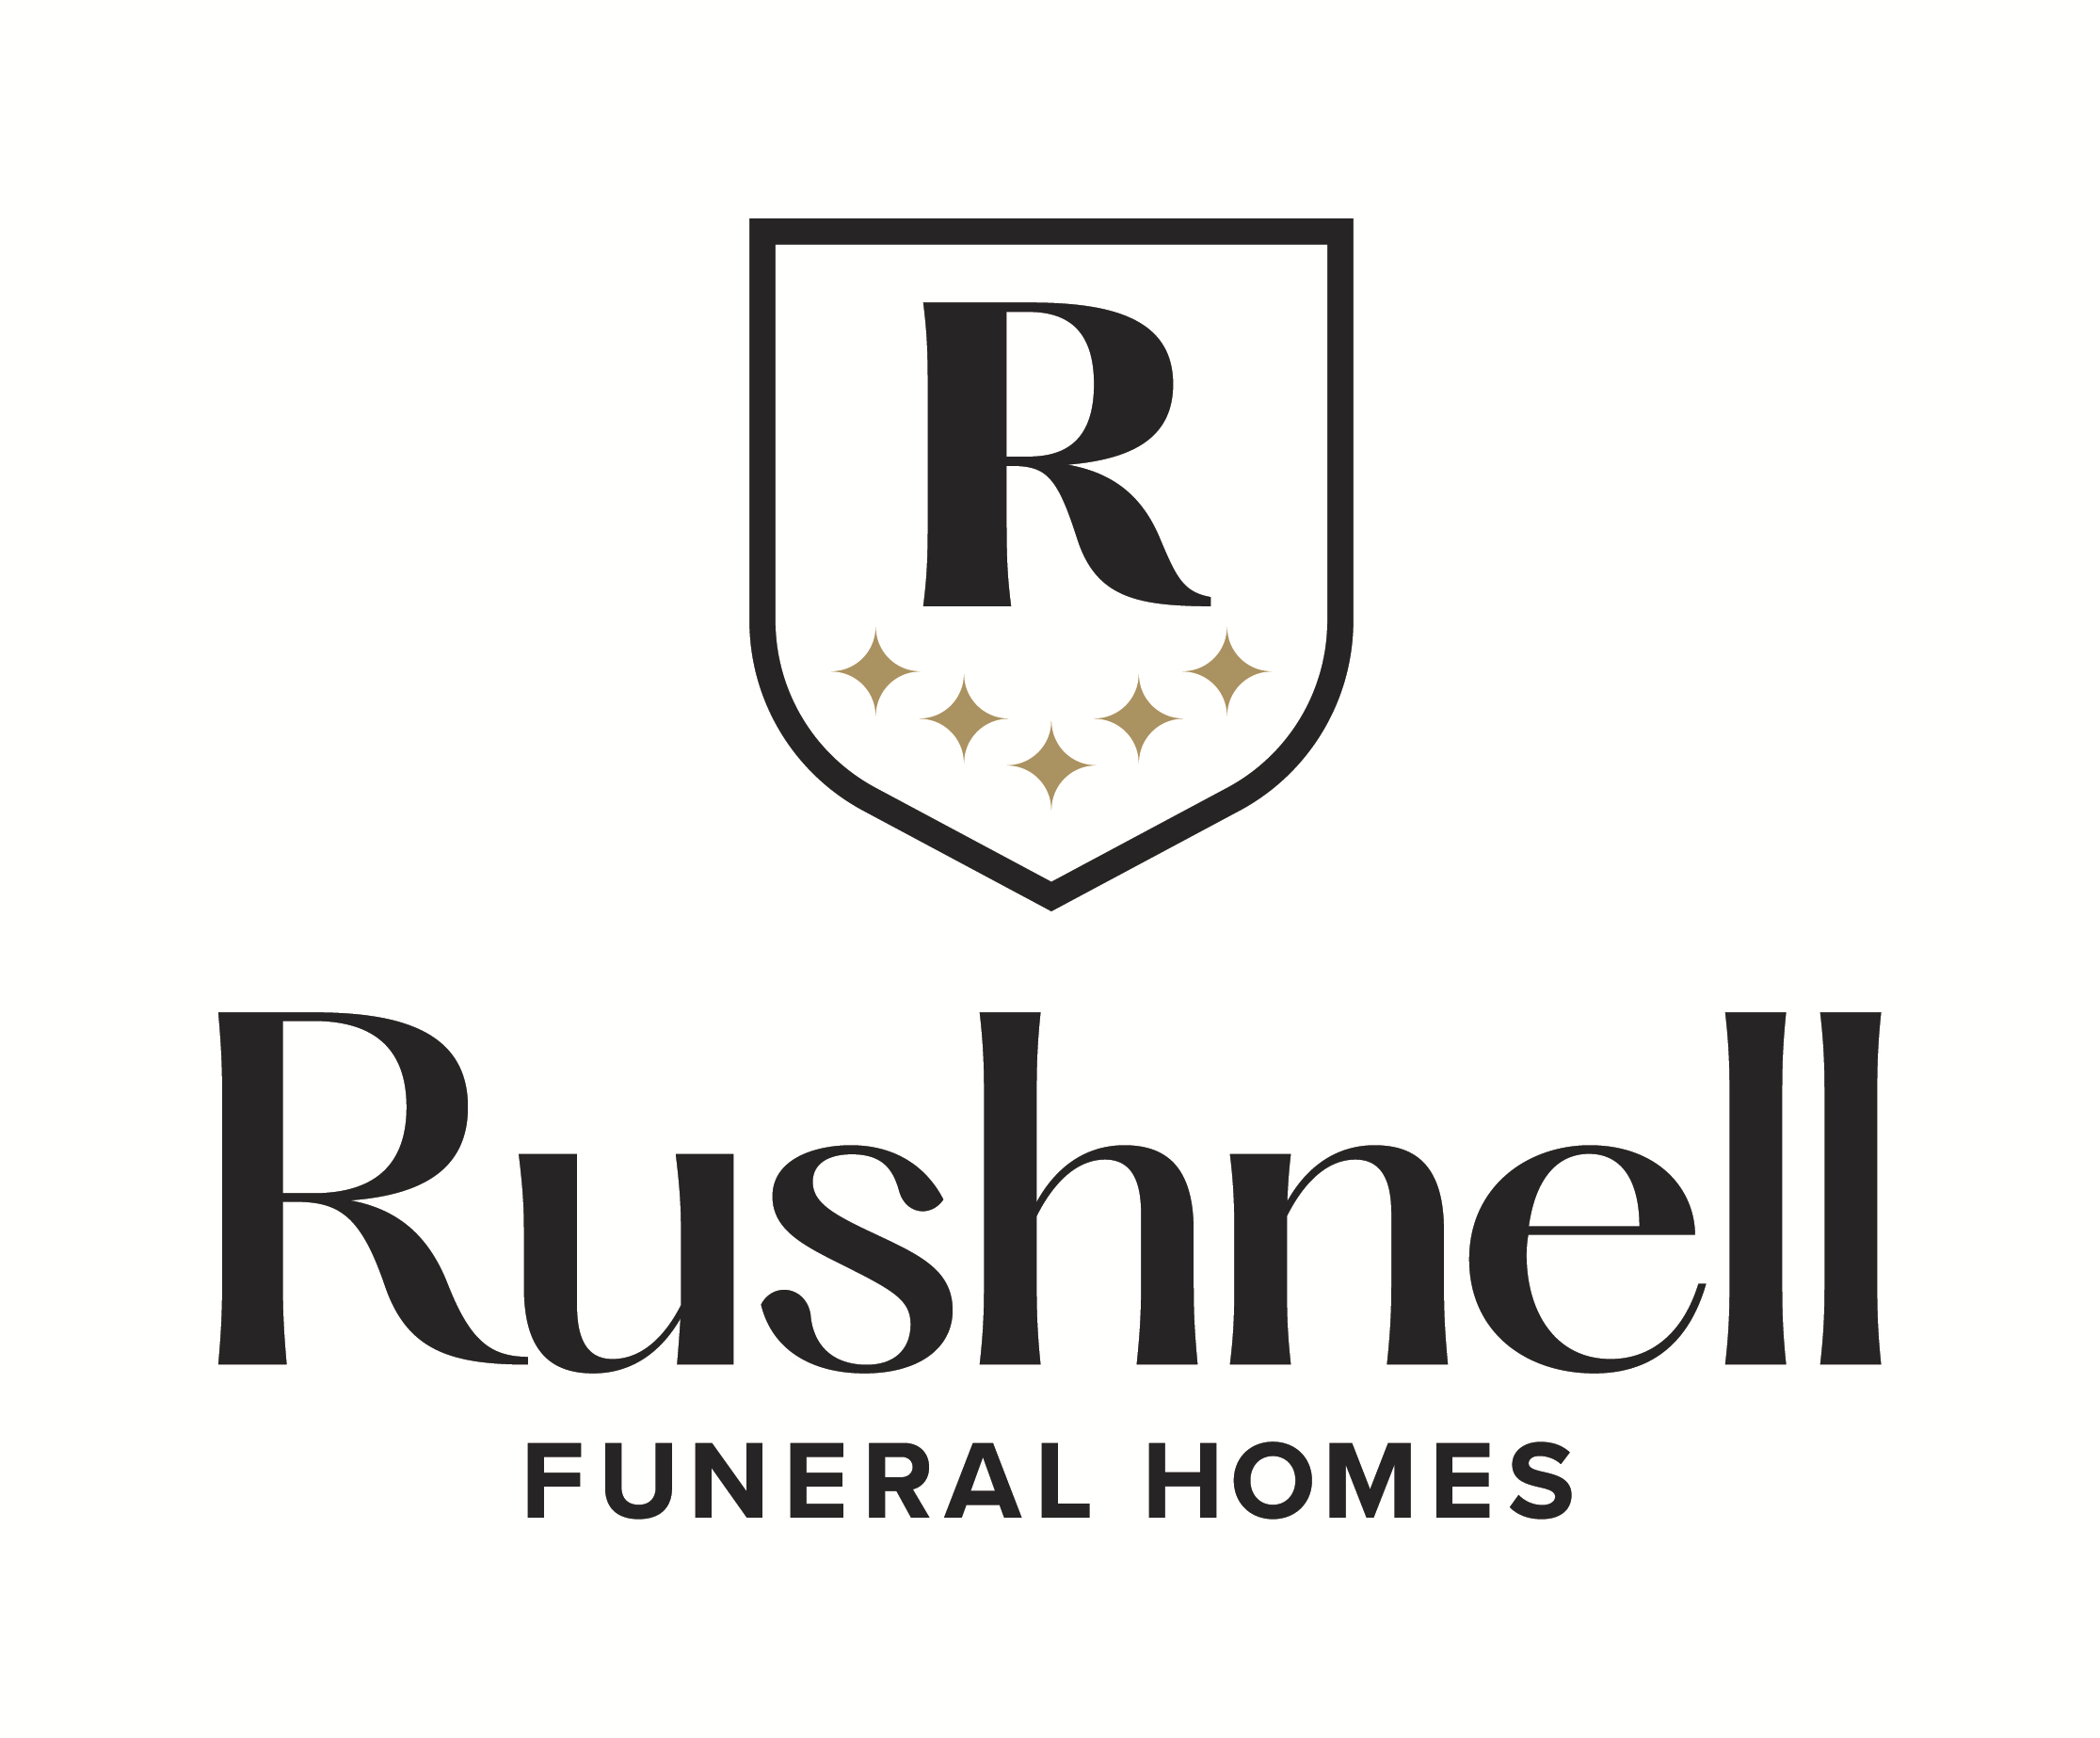 Rushnell Funeral Homes Inc